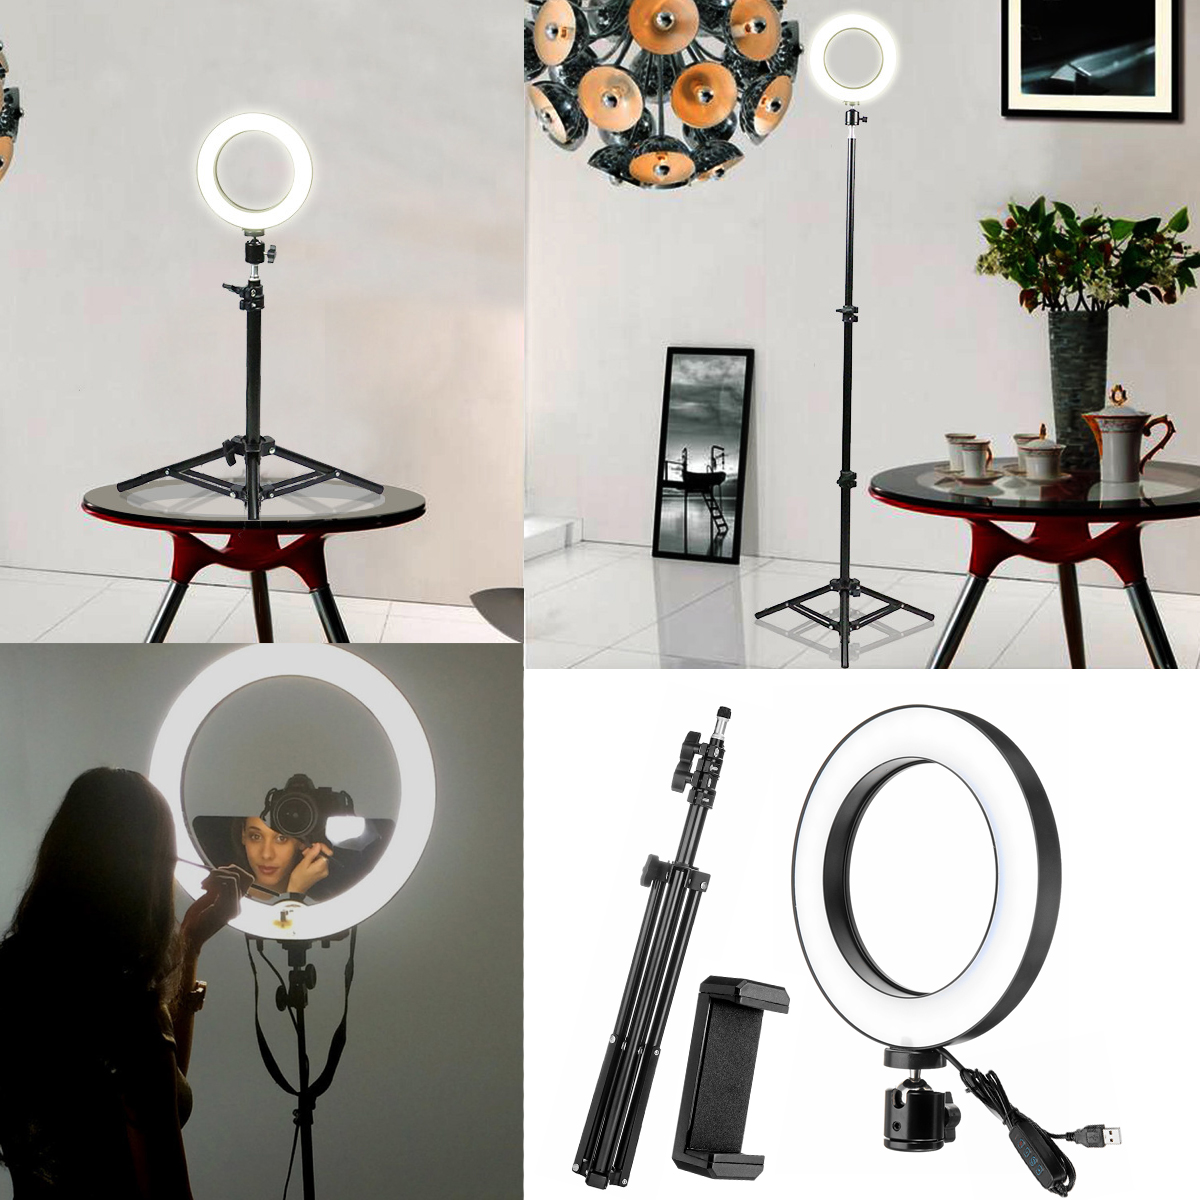 16cm-LED-Video-Ring-Light-5500K-Dimmable-with-160cm-Adjustable-Light-Stand-for-Youtube-Tiktok-Live-S-1403937-7